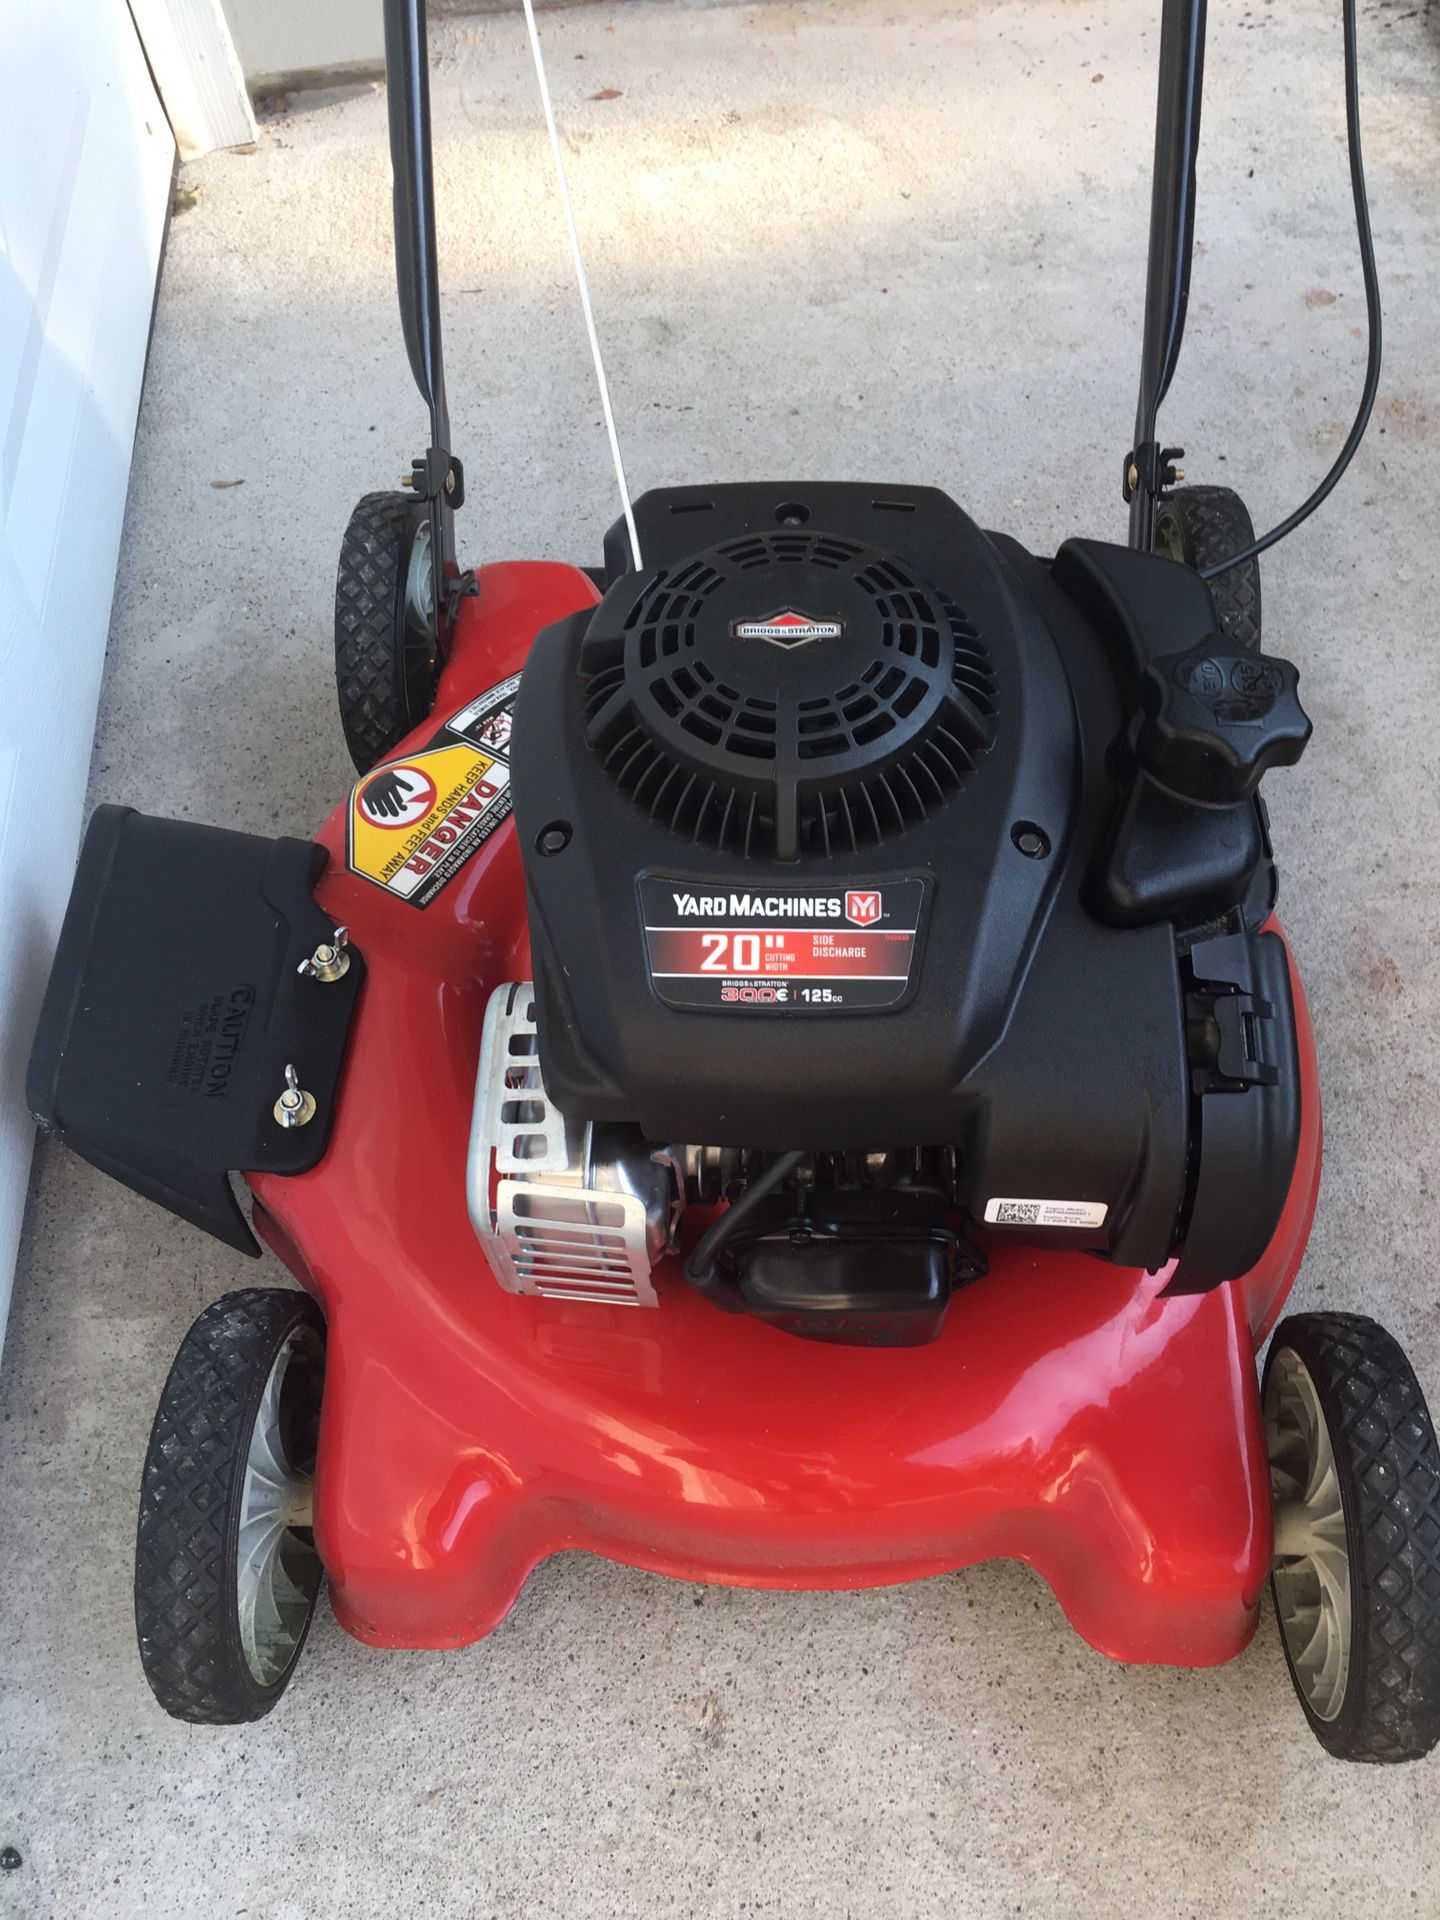 YARED MACHINE LAWN MOWER - LIKE NEW CONDITION